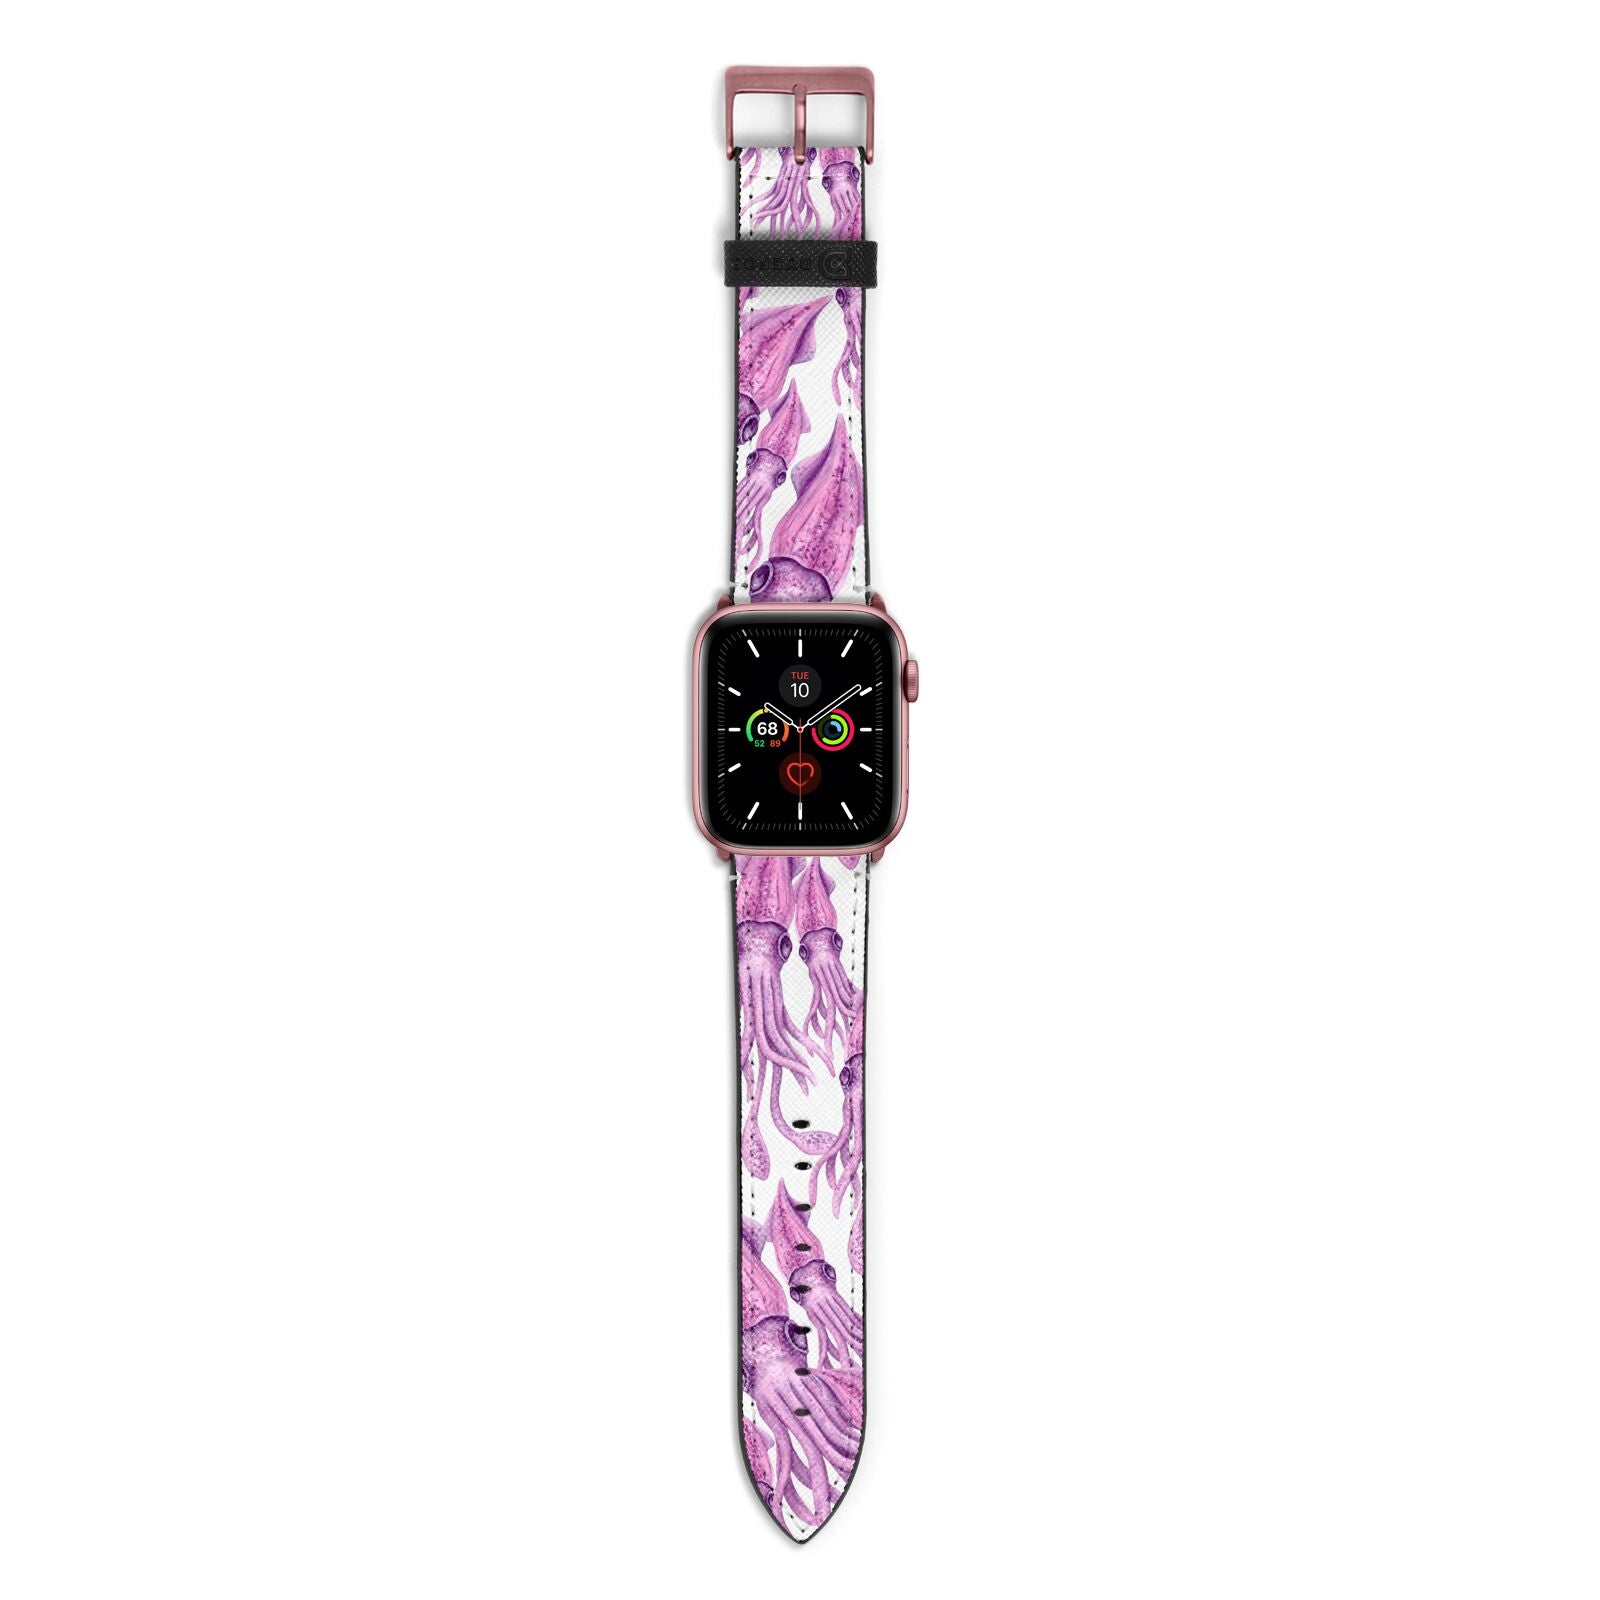 Squid Apple Watch Strap with Rose Gold Hardware